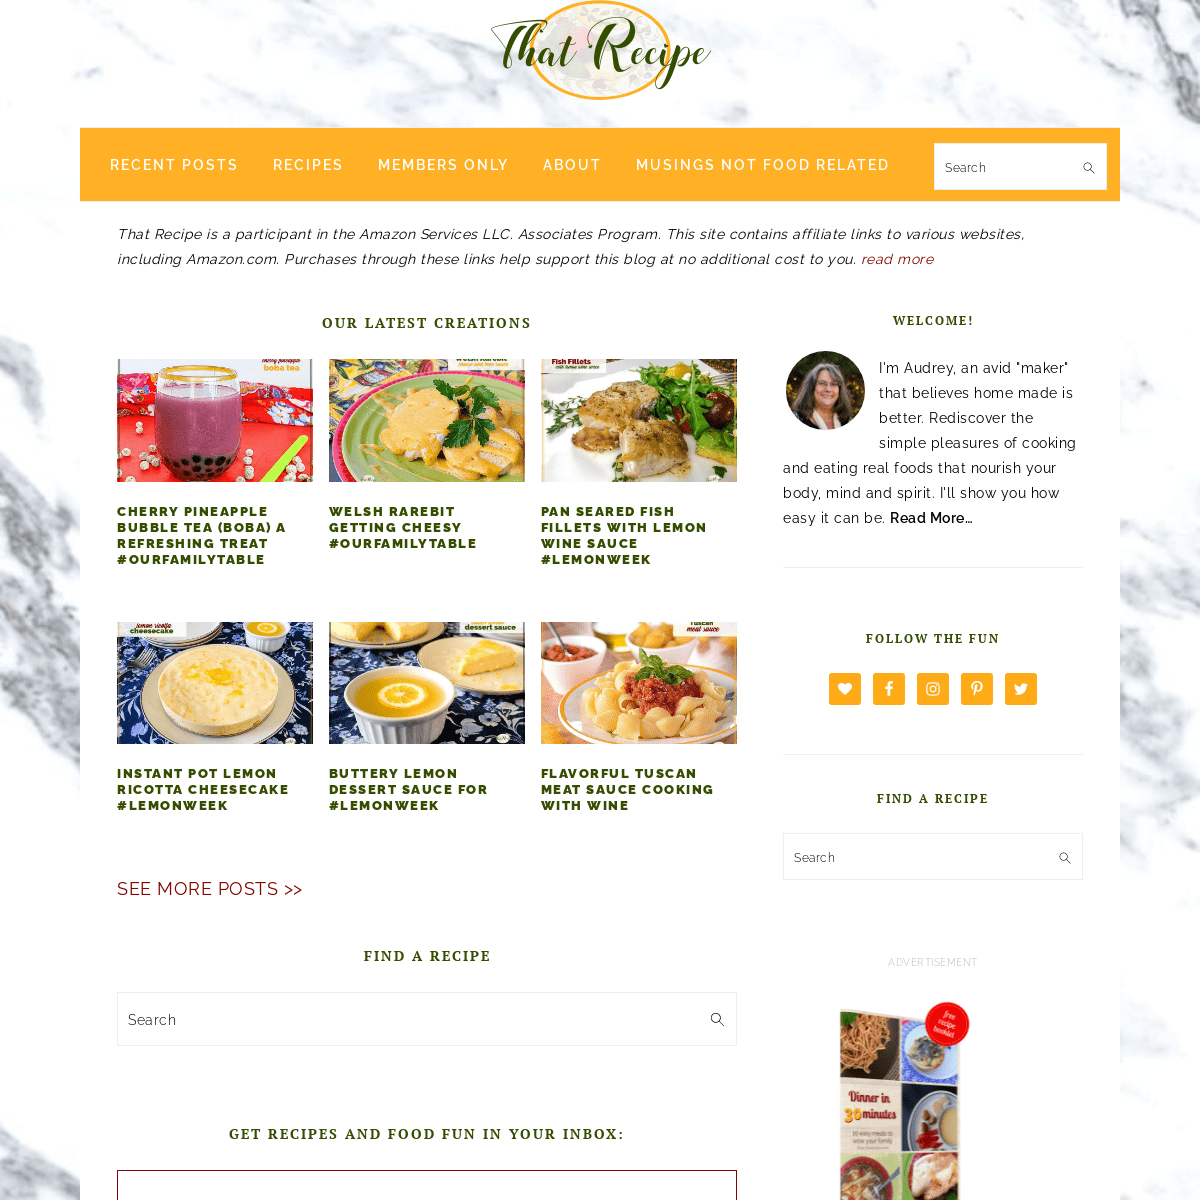 A complete backup of https://thatrecipe.com